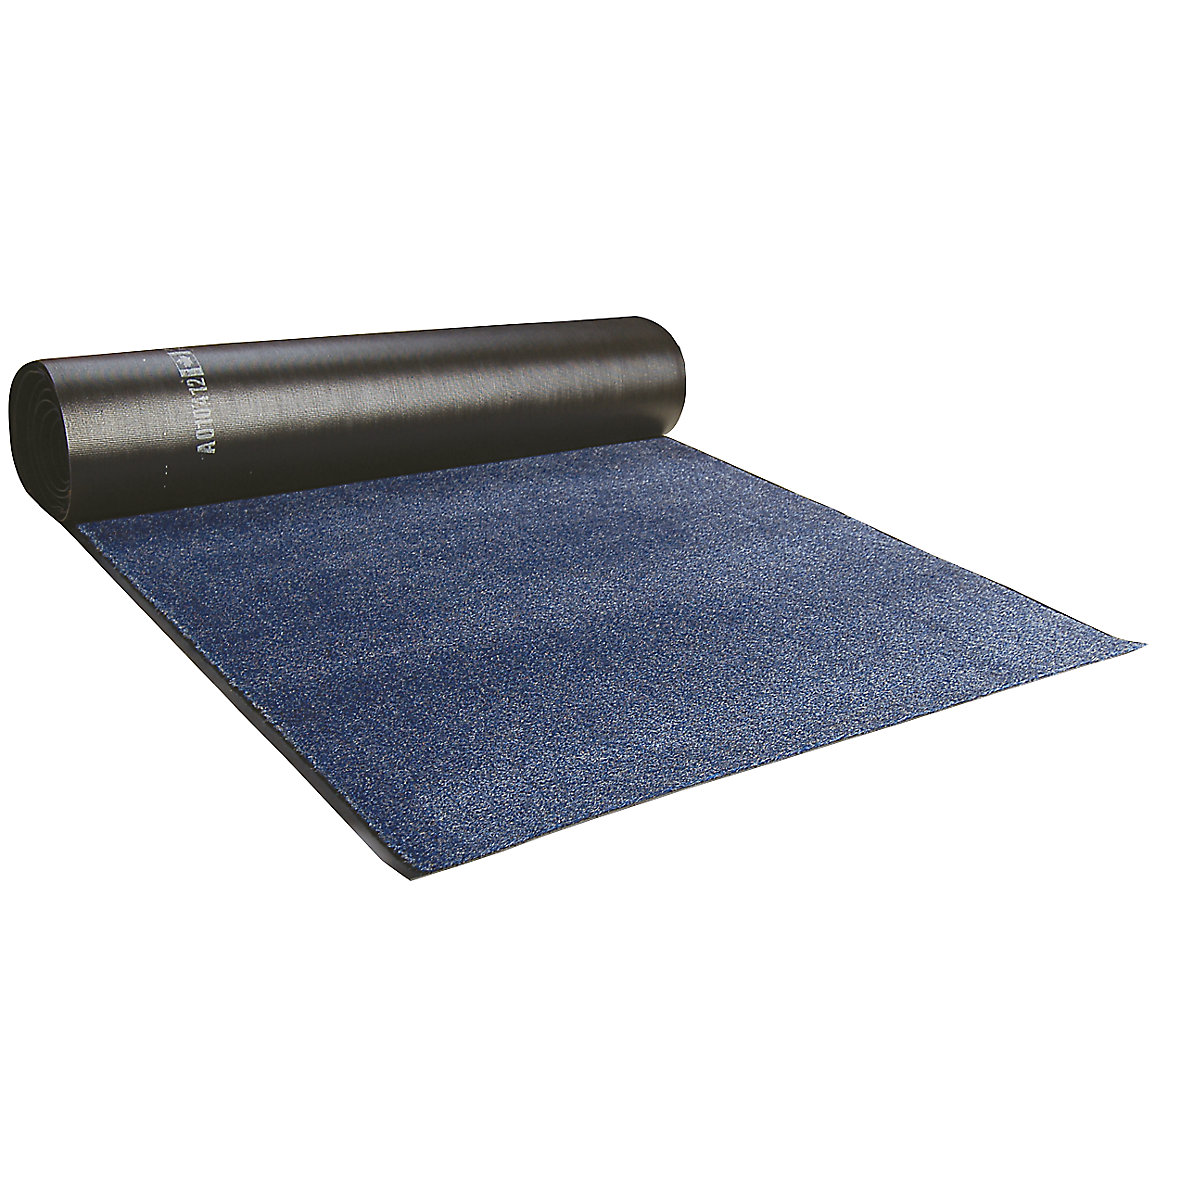 EAZYCARE AQUA entrance matting, width 1850 mm, sold by the metre, blue